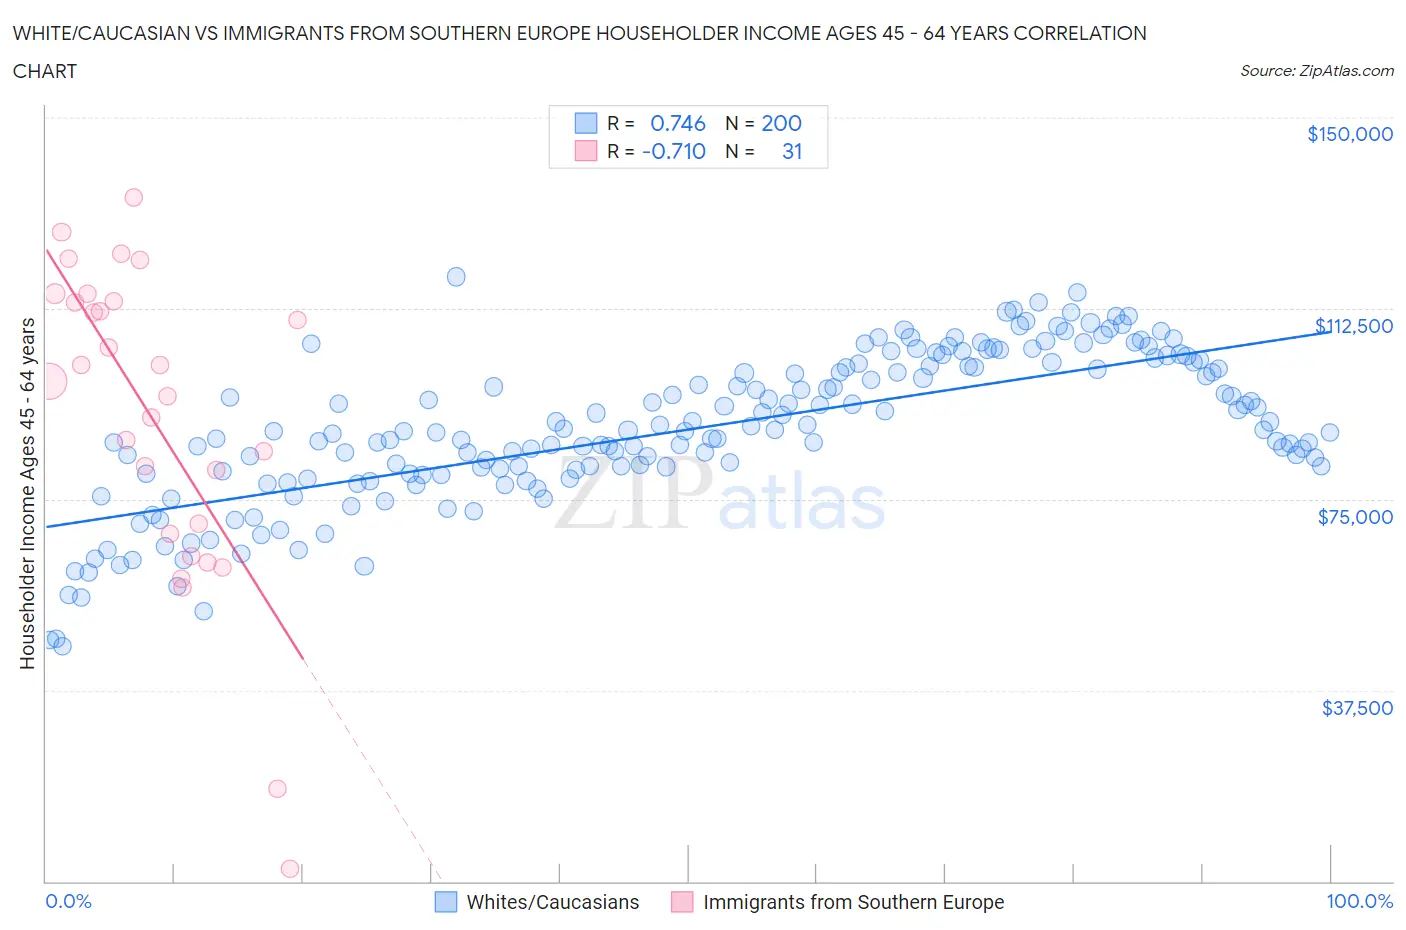 White/Caucasian vs Immigrants from Southern Europe Householder Income Ages 45 - 64 years